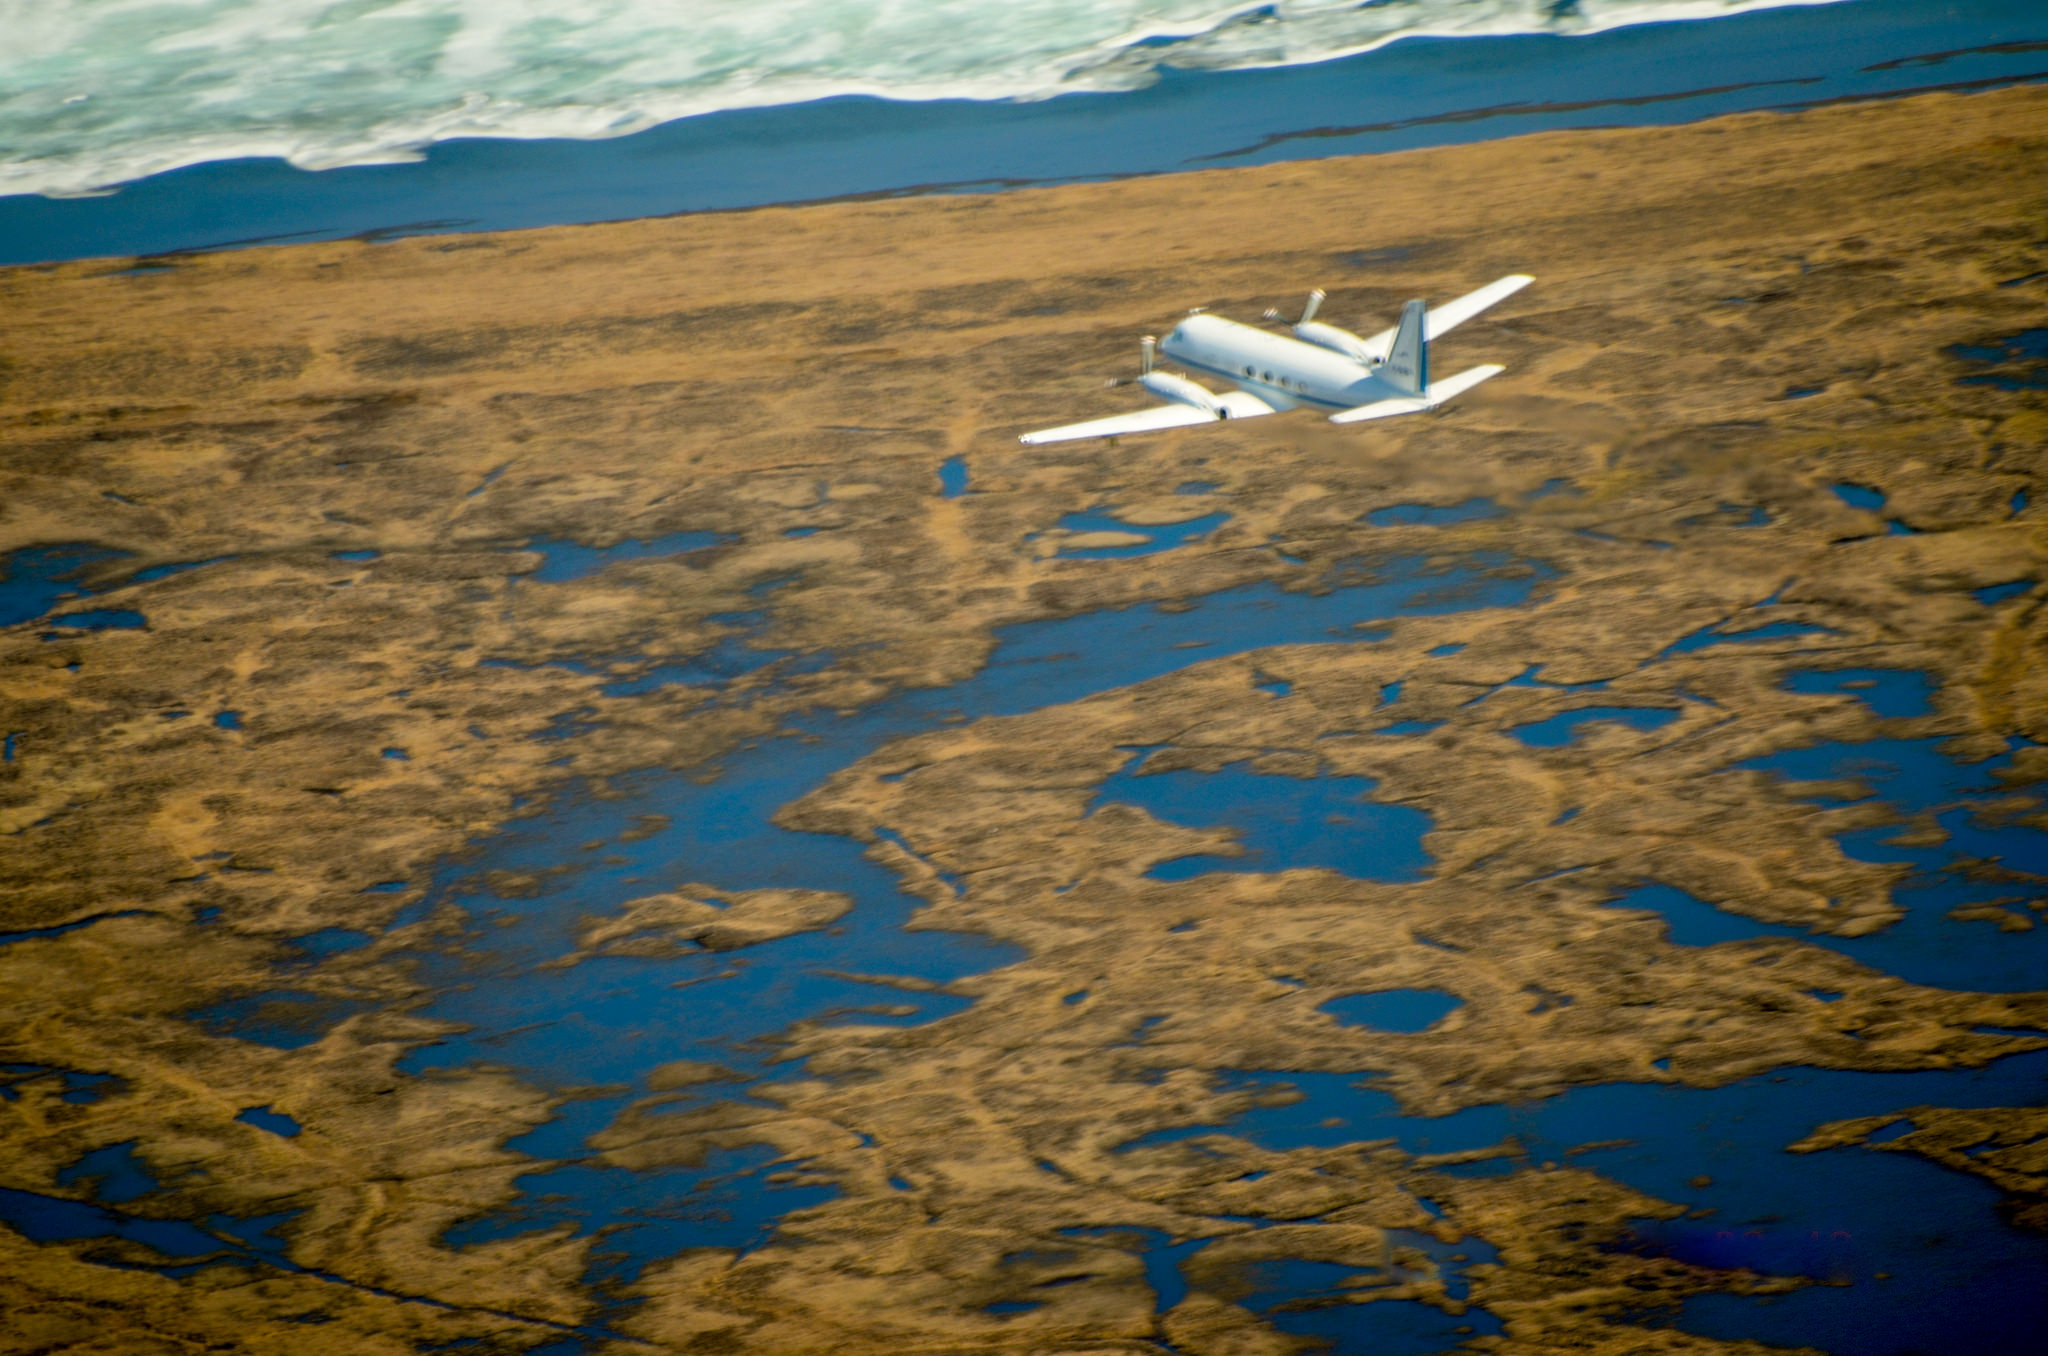 The Gulfstream-159 (G-1) research aircraft heads north towards Barrow, Alaska, in the summer of 2015, measuring trace gases above the treeless tundra and icy lakes of the Arctic. 